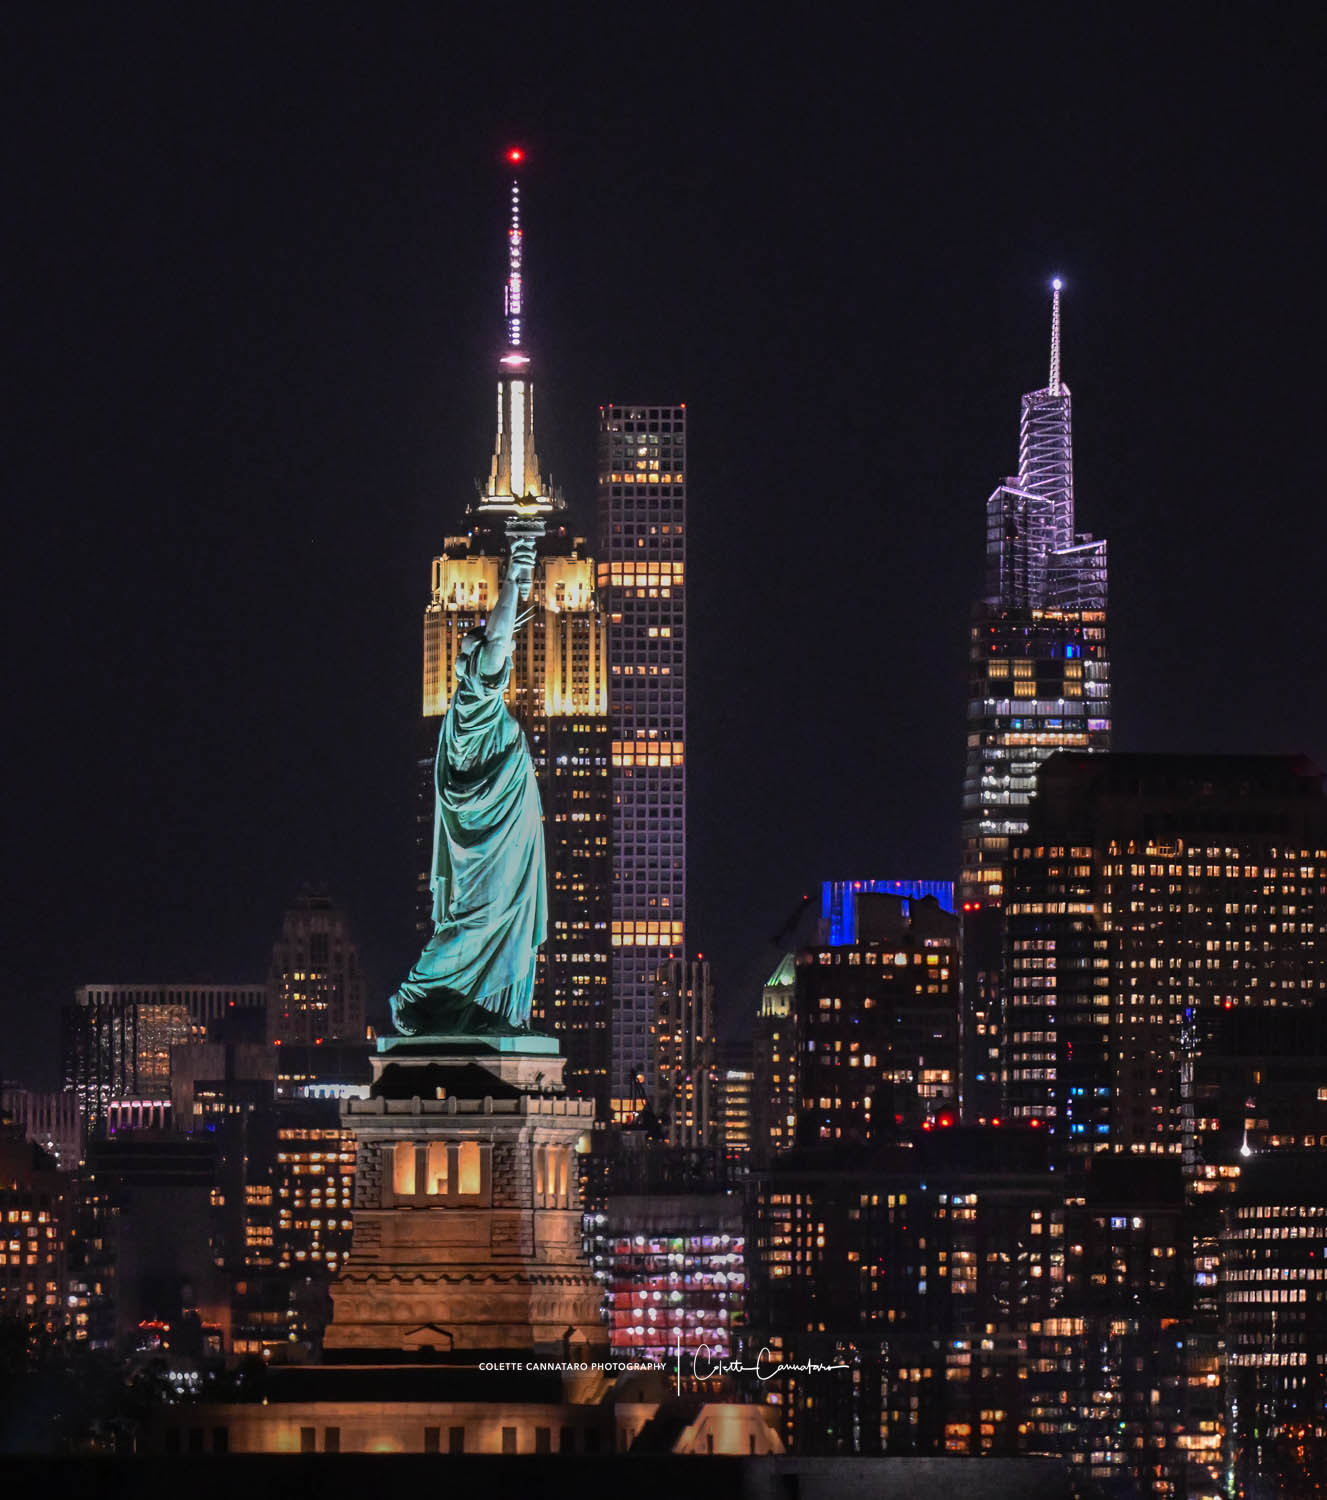 The Statue of Liberty all lined up with the Empire State Building.